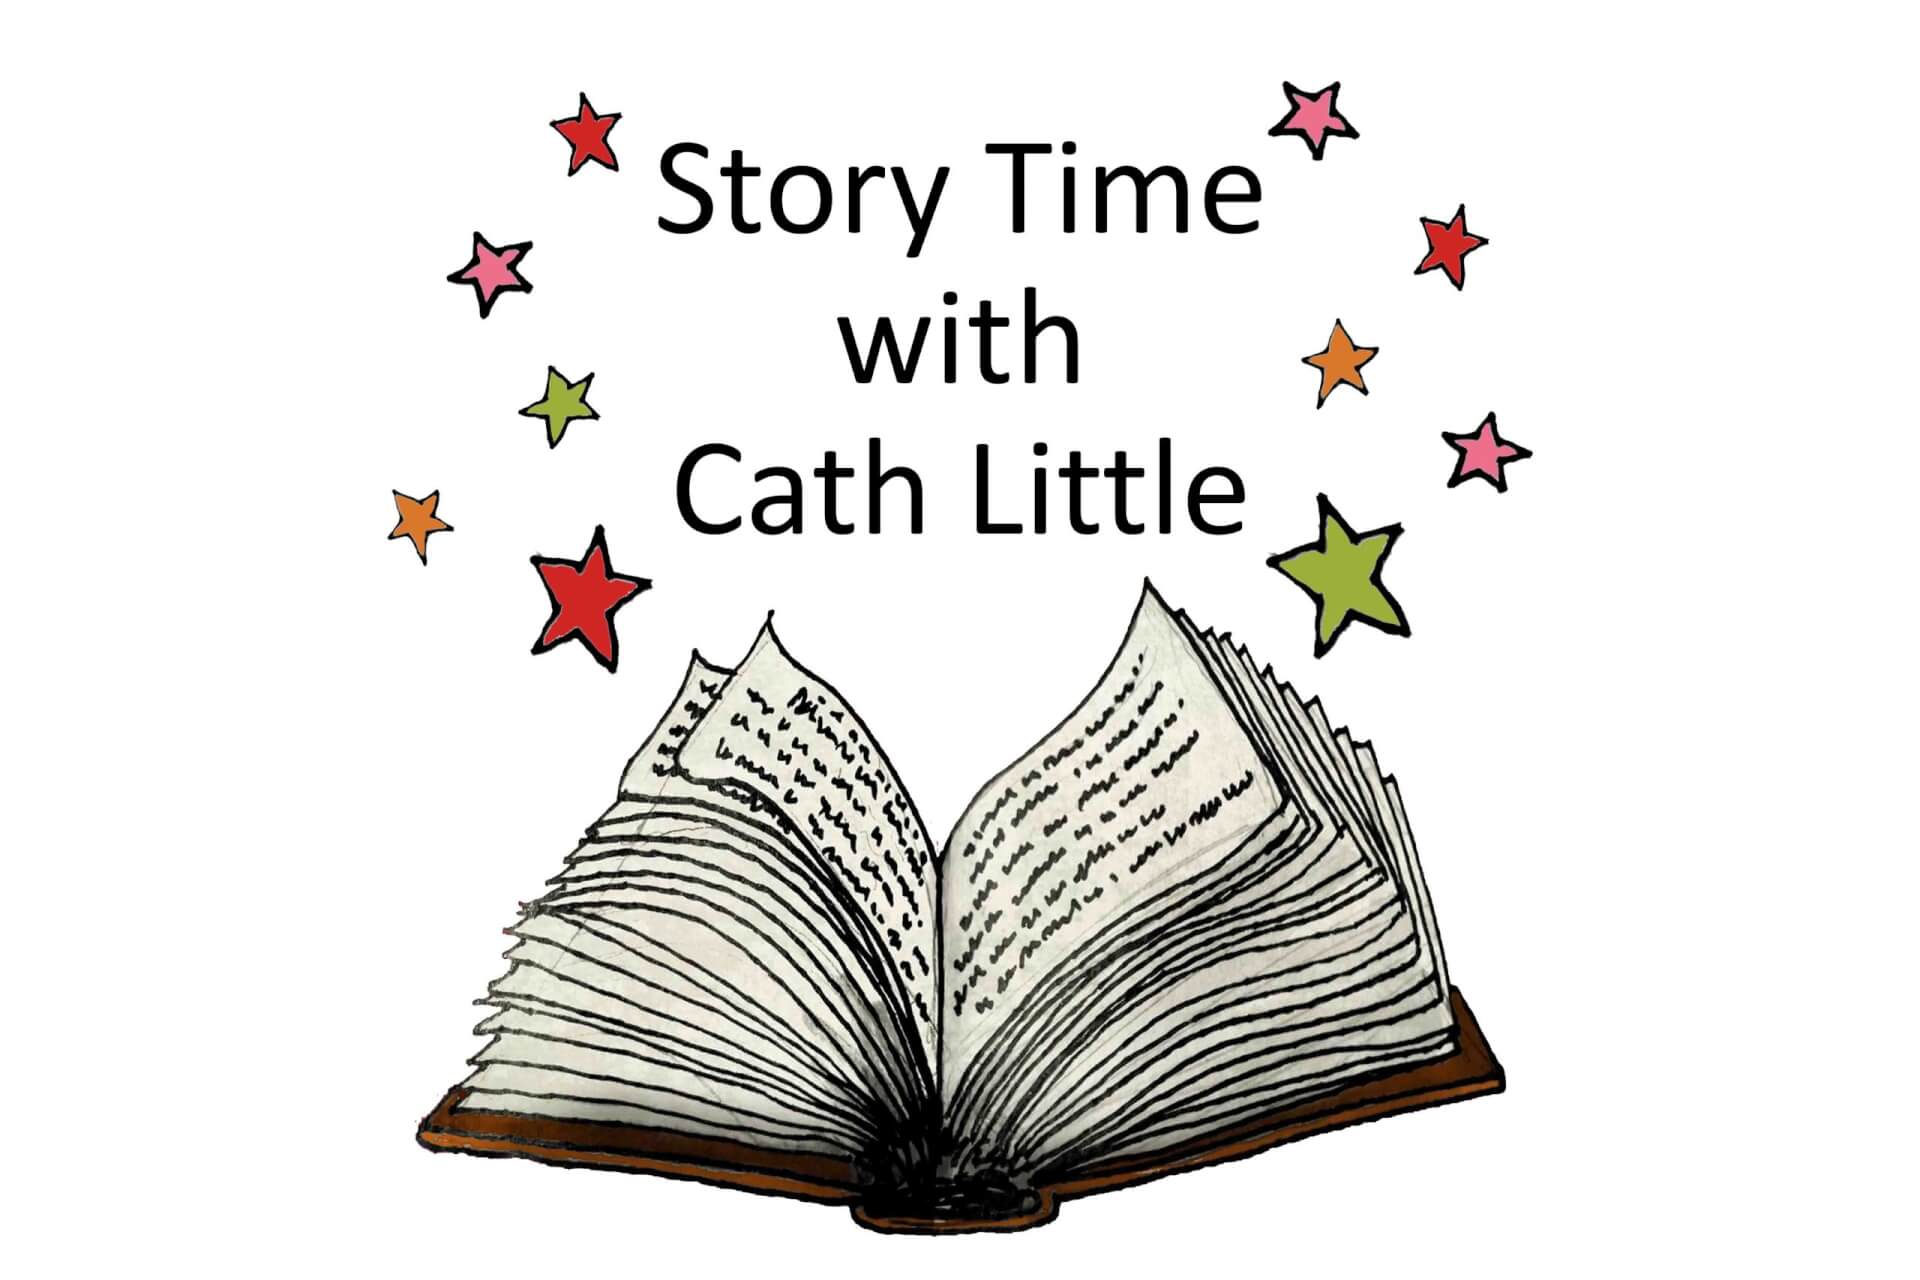 Story Time with Cath Little